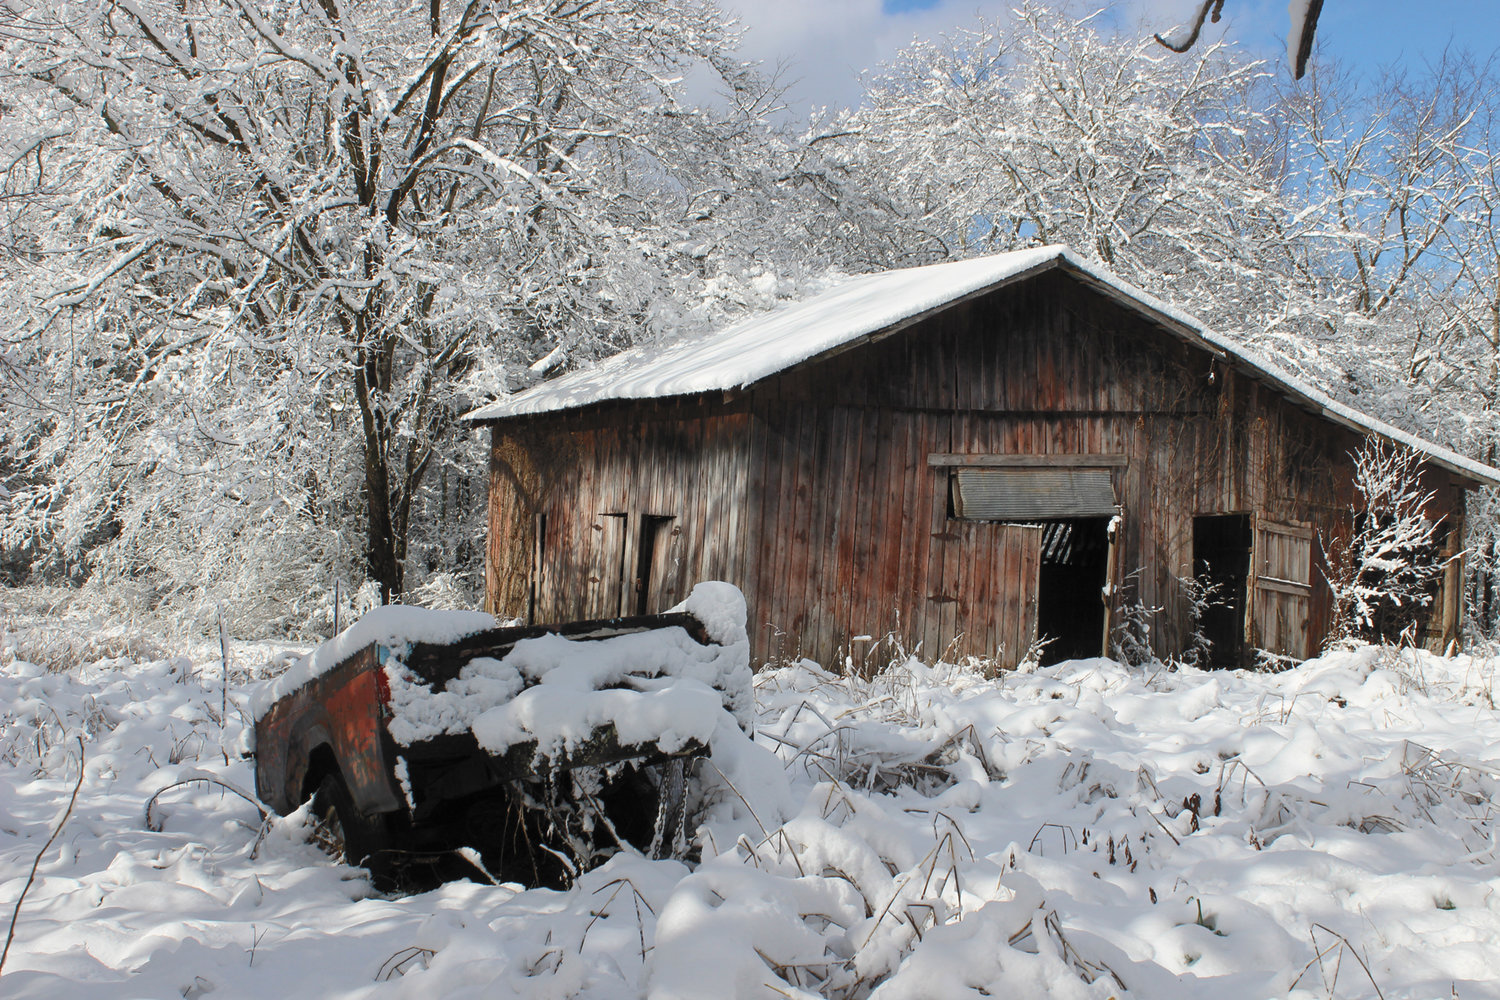 An abandoned barn on Himesville Road rests peacefully in a blanket of snow.